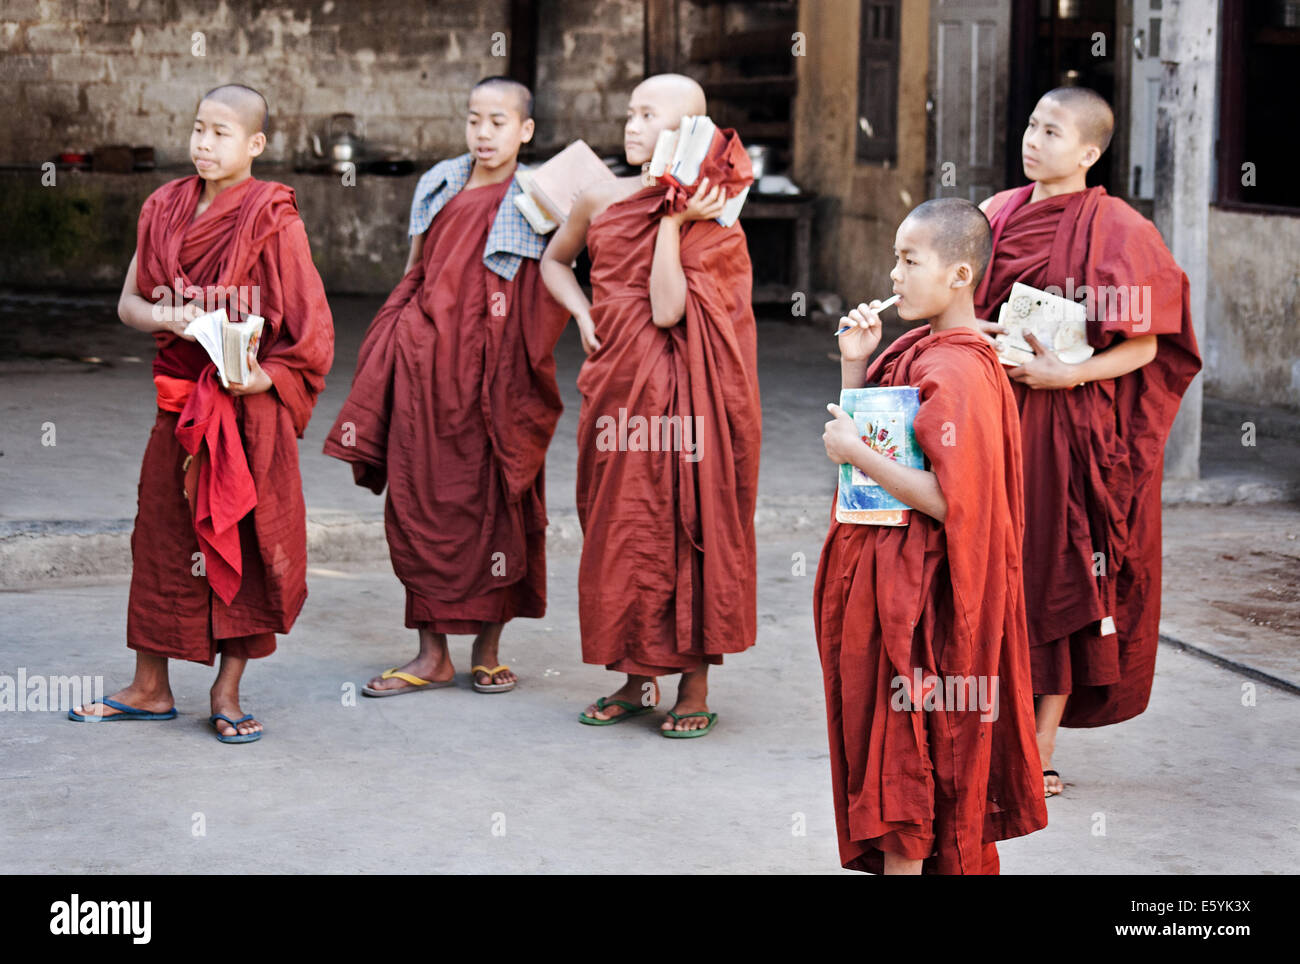 Novice Burmese Buddhist monks listening to a discourse with learning materials at the ready in a Buddhist monastery dressed in traditional robes Stock Photo